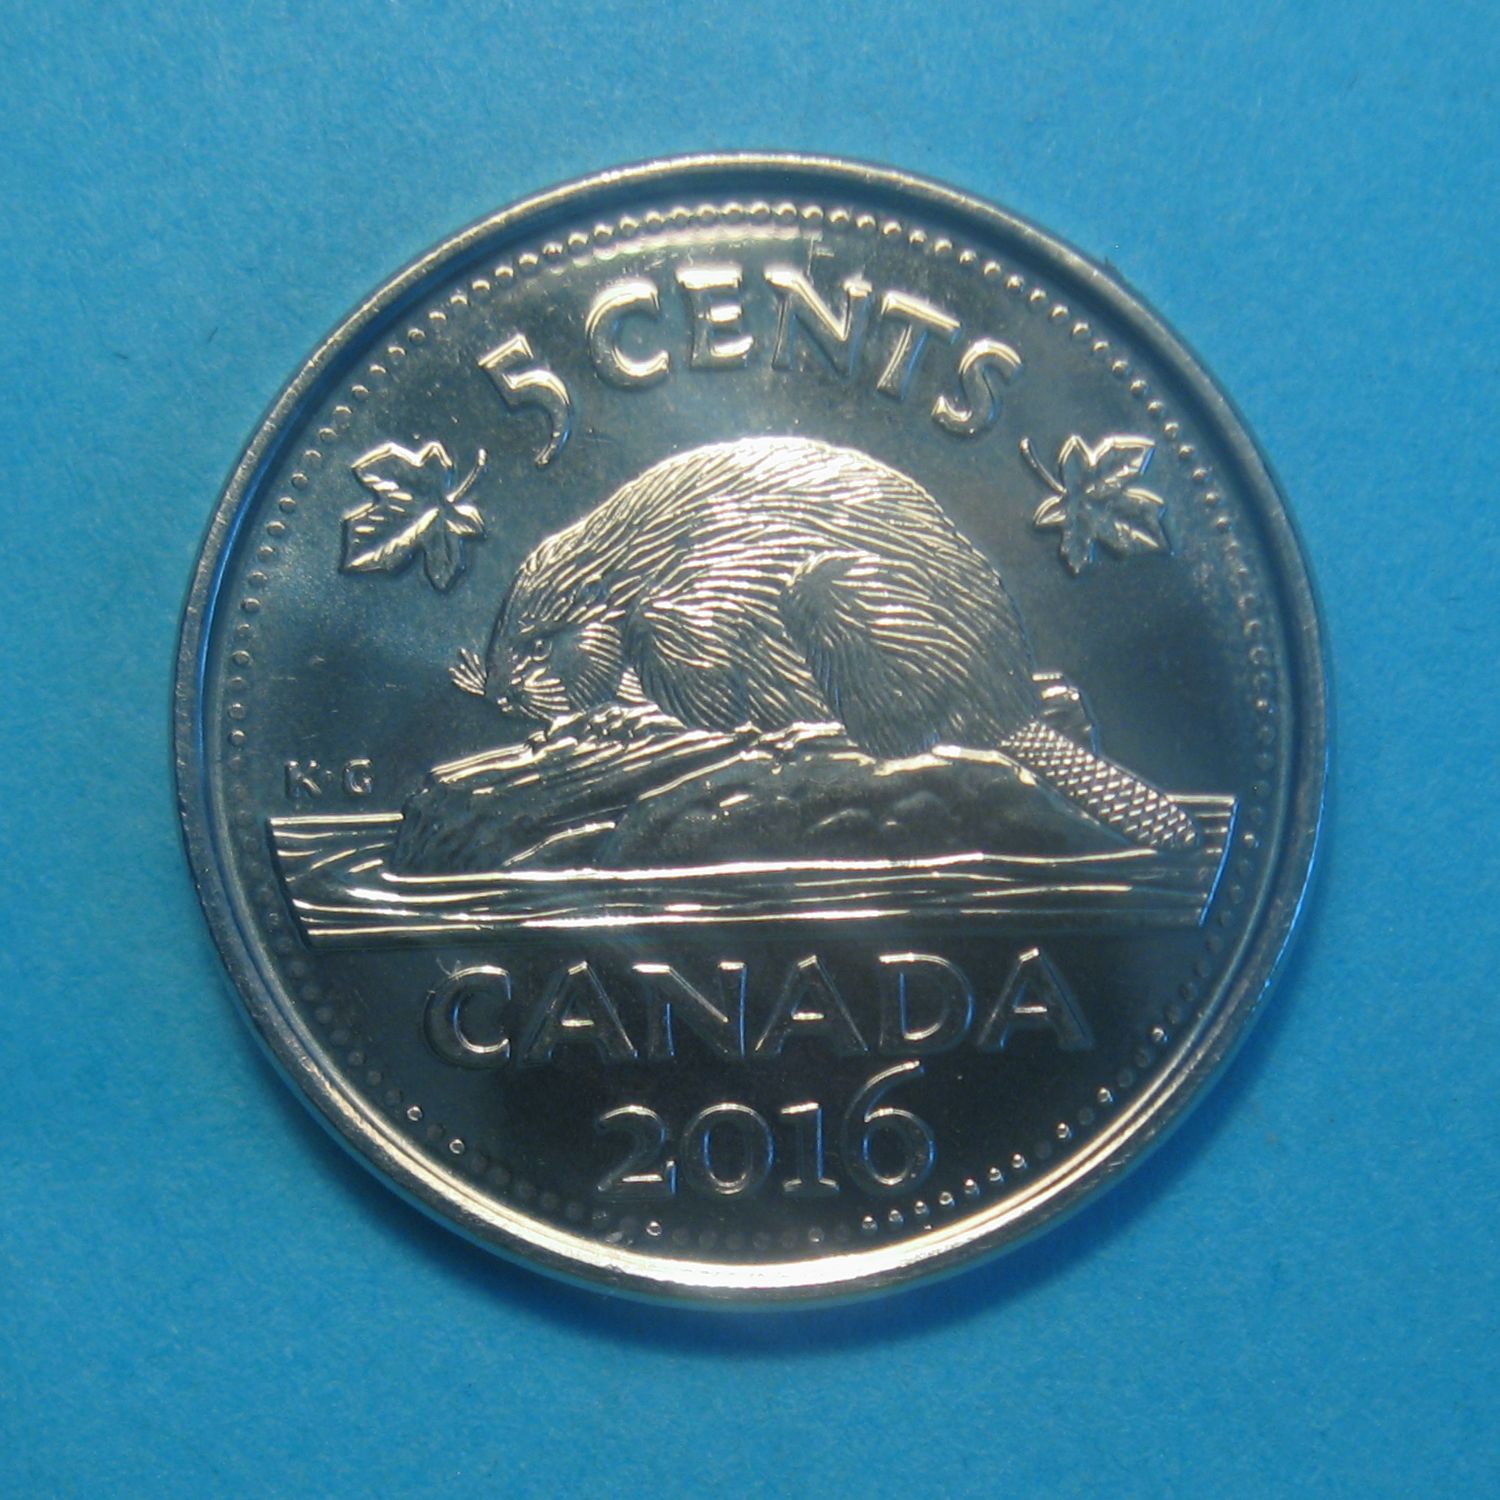 5-cents-2016-can-e19-revers.jpg